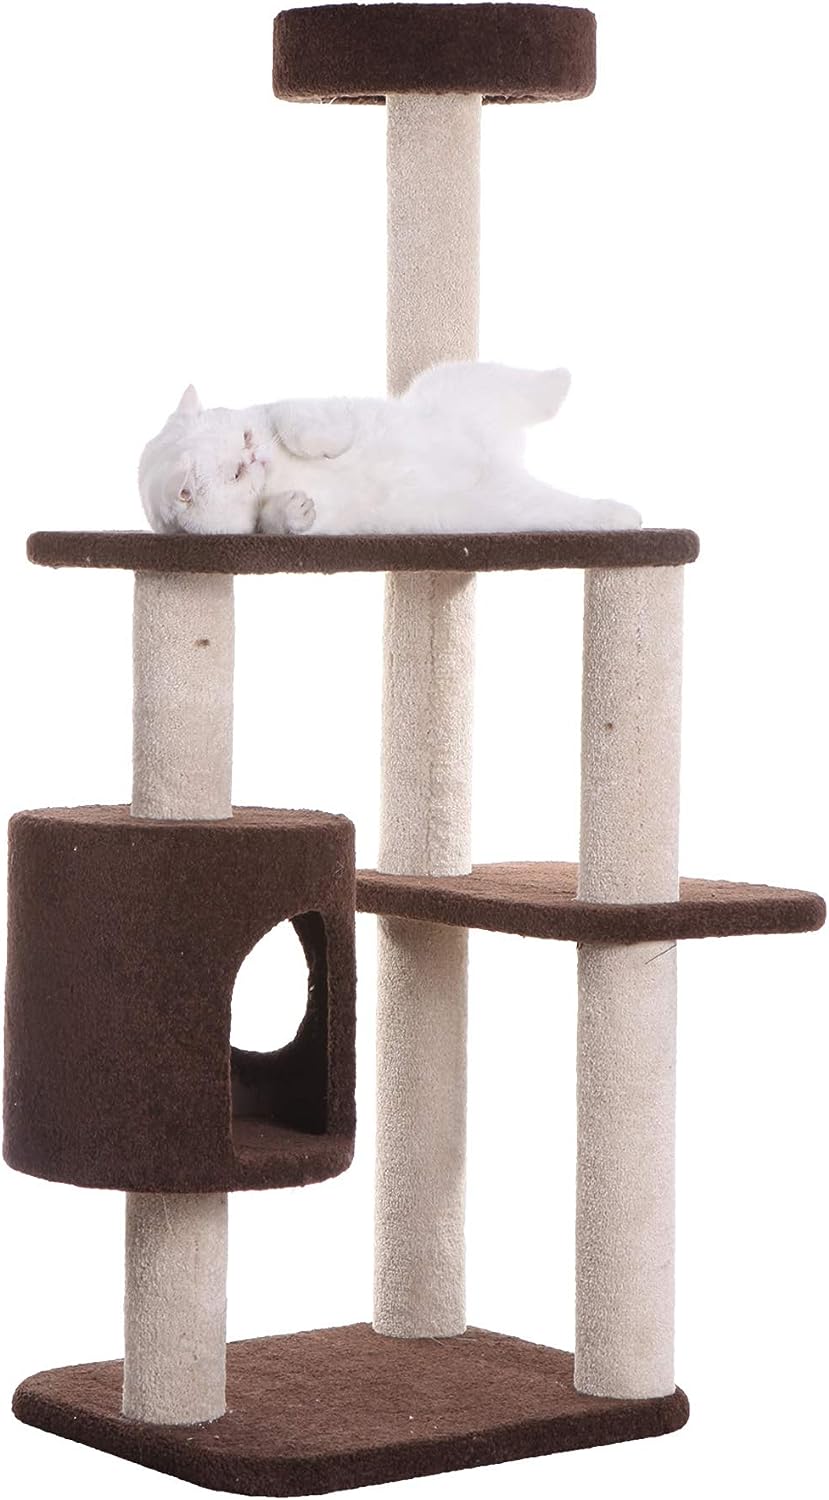 Armarkat 3-Level Carpeted Cat Tree Condo F5502, Real Wood Kitten Play House, Brown